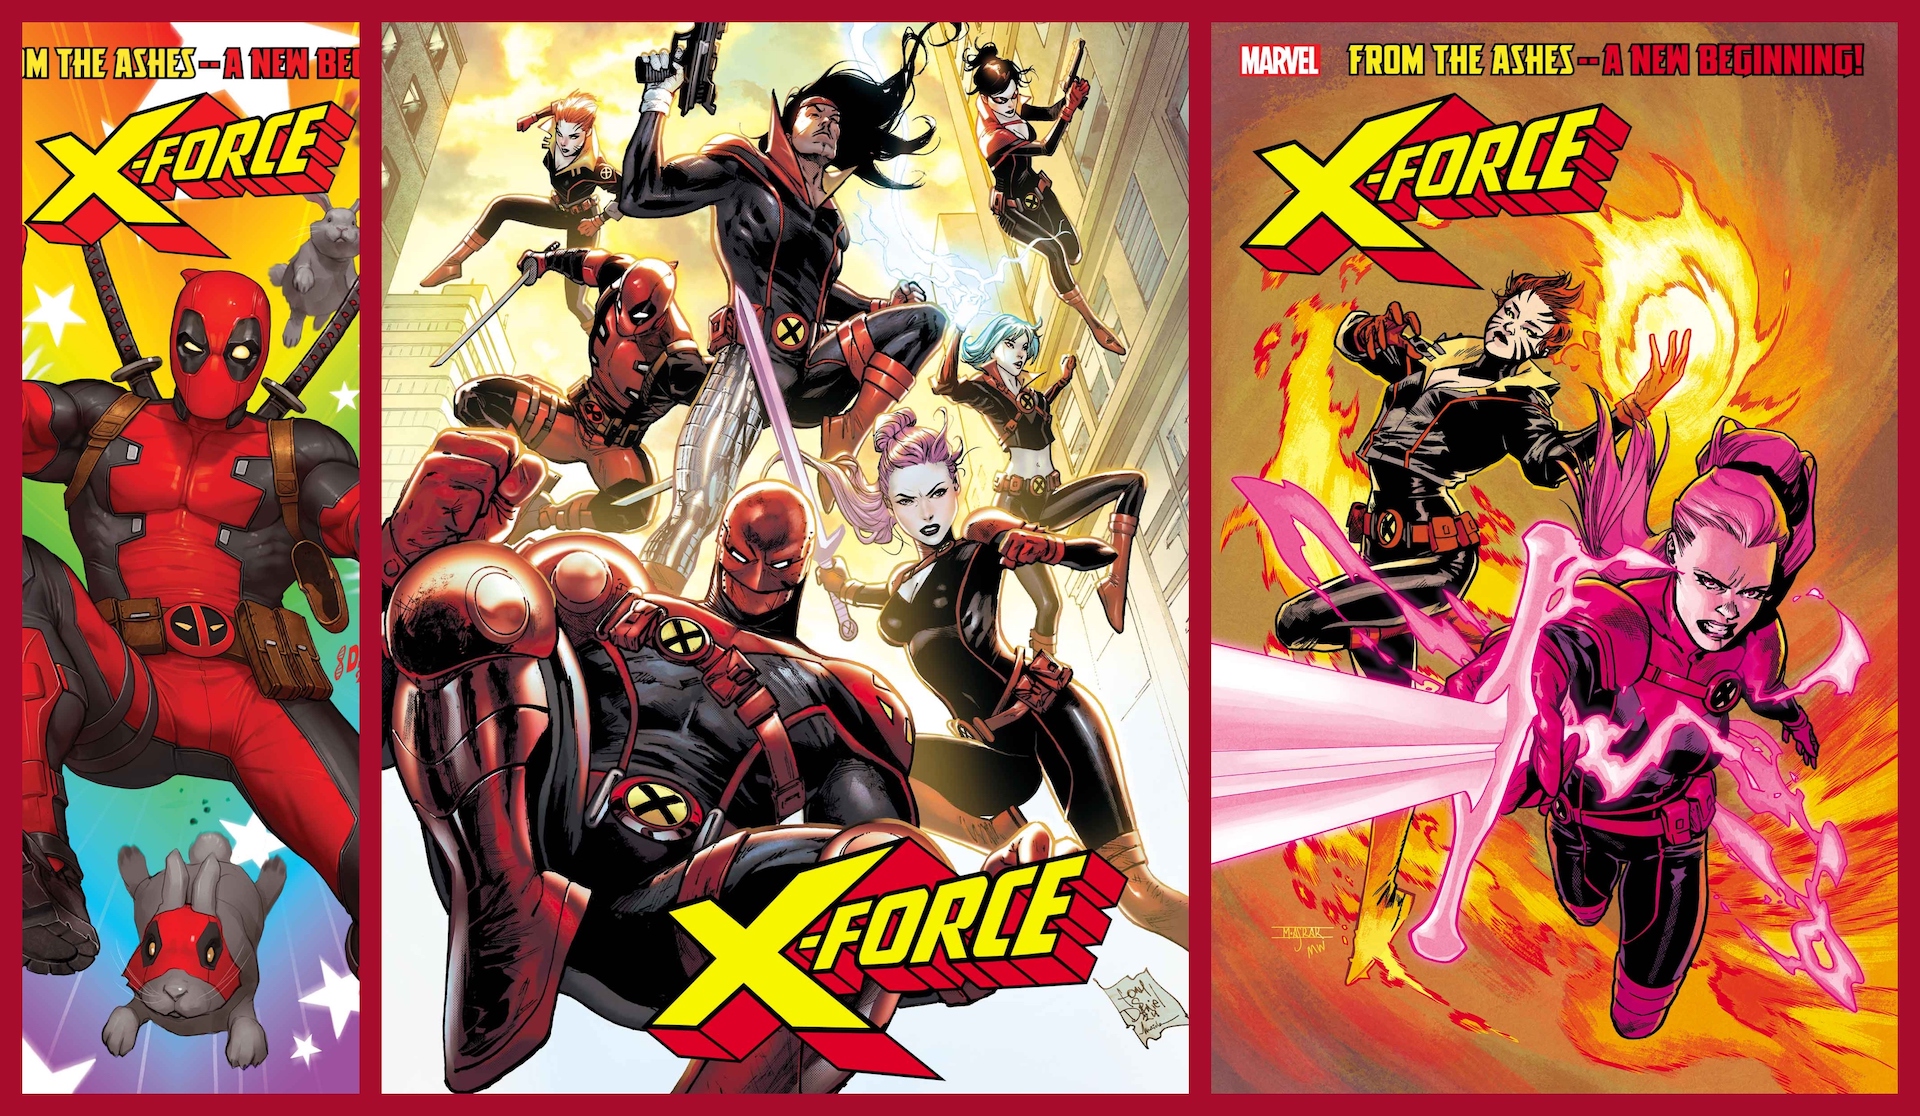 New 'X-Force' #1 scores a number of variant covers